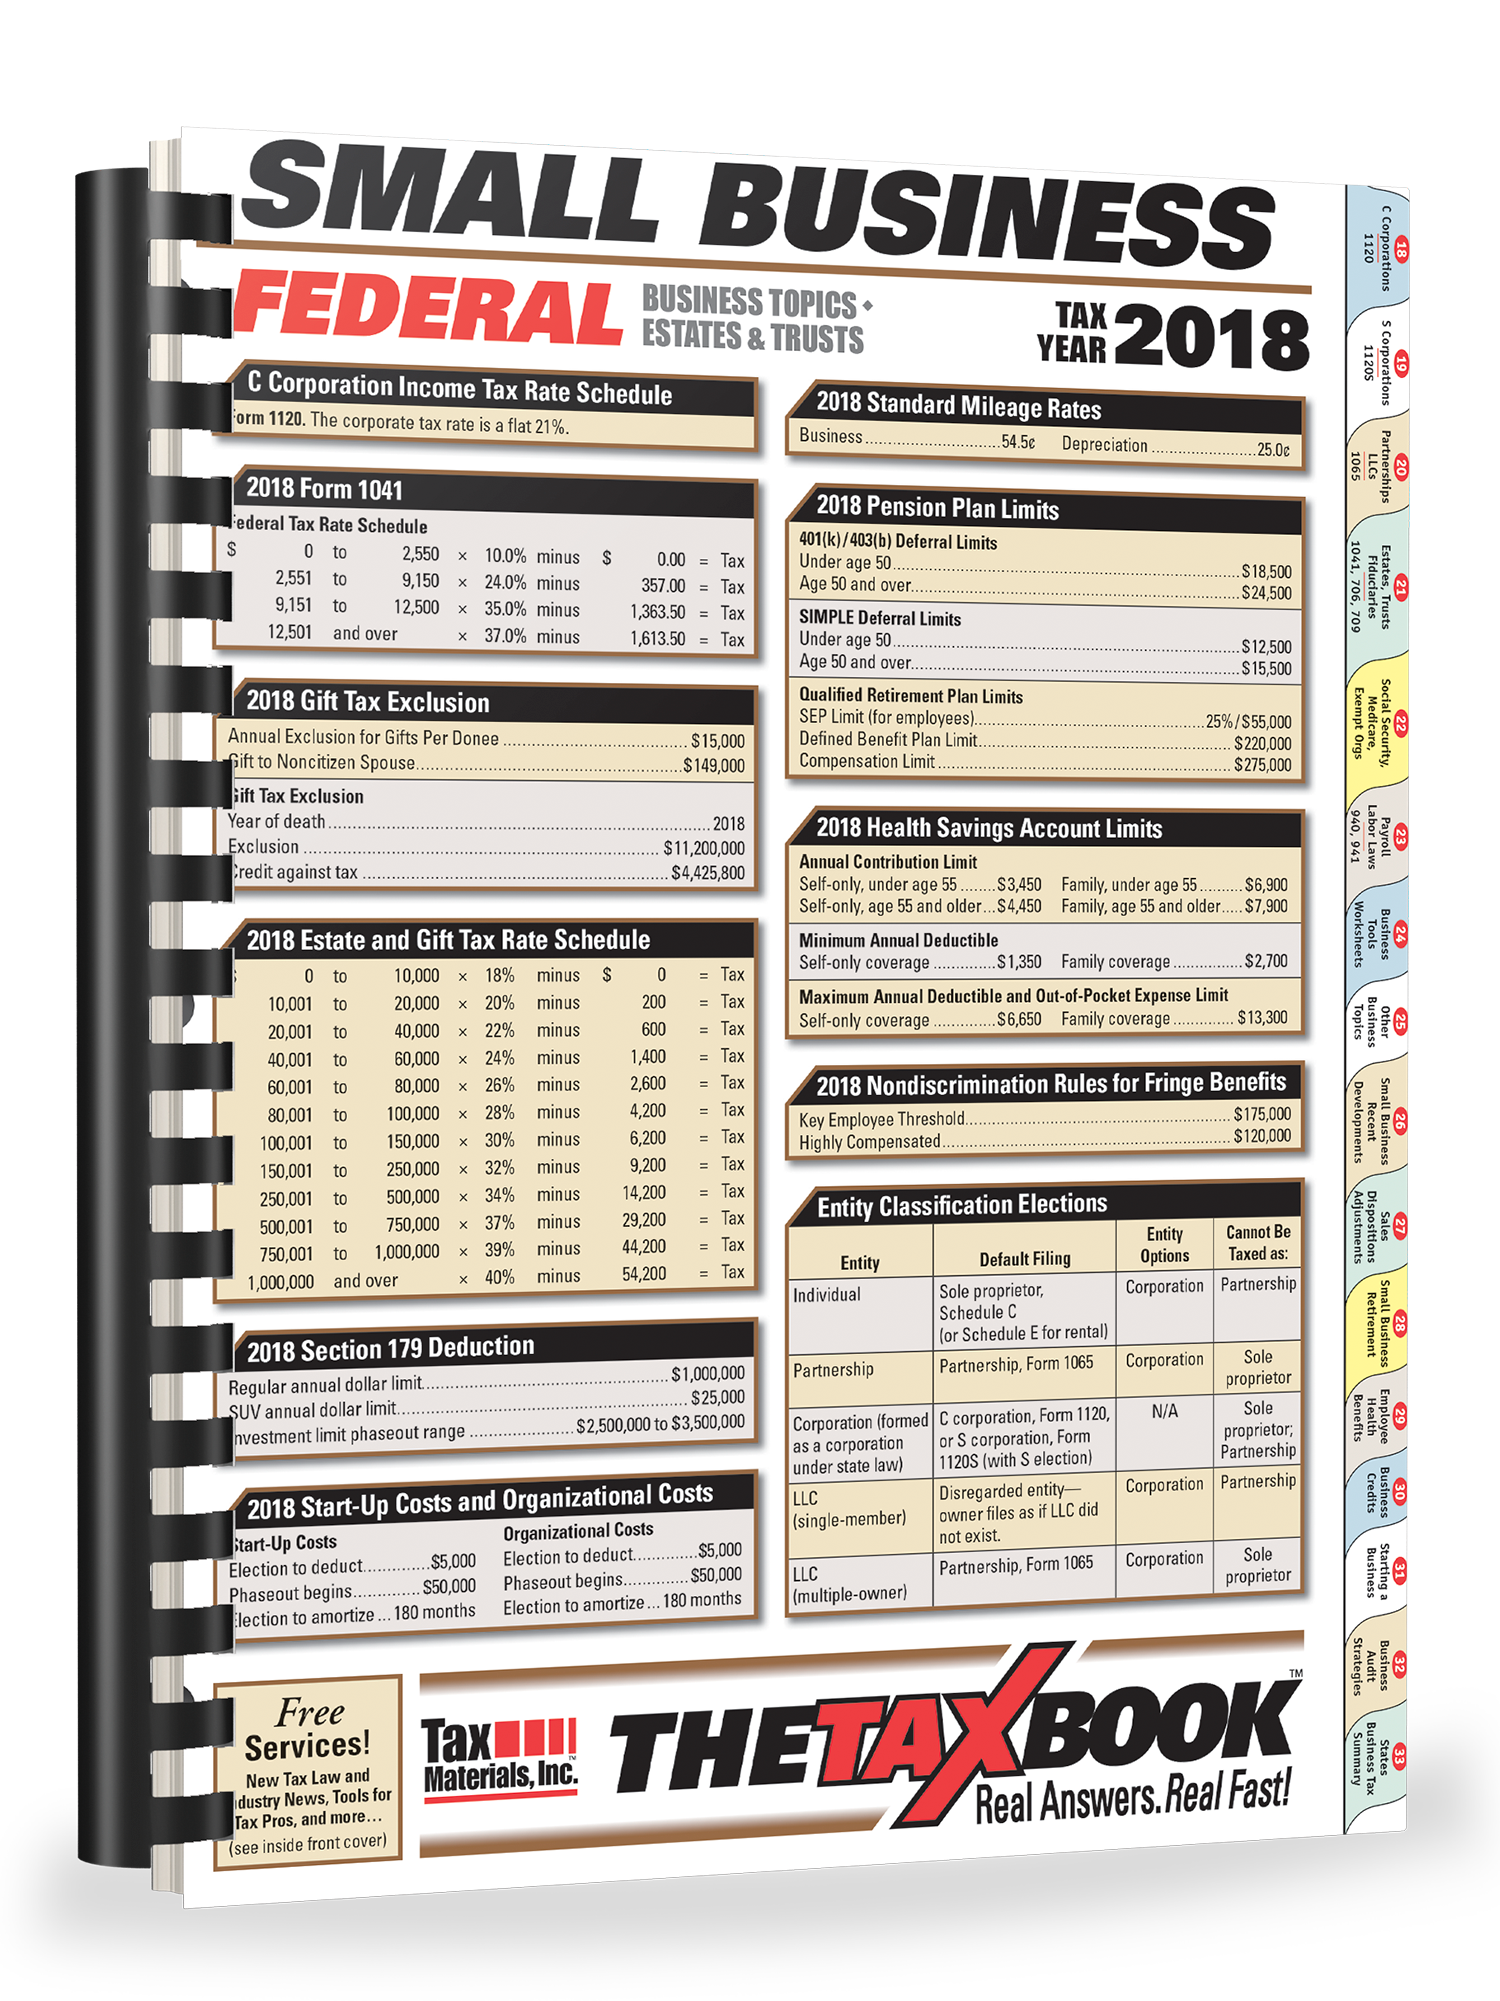 TheTaxBook Small Business Edition (2018) - #3894 